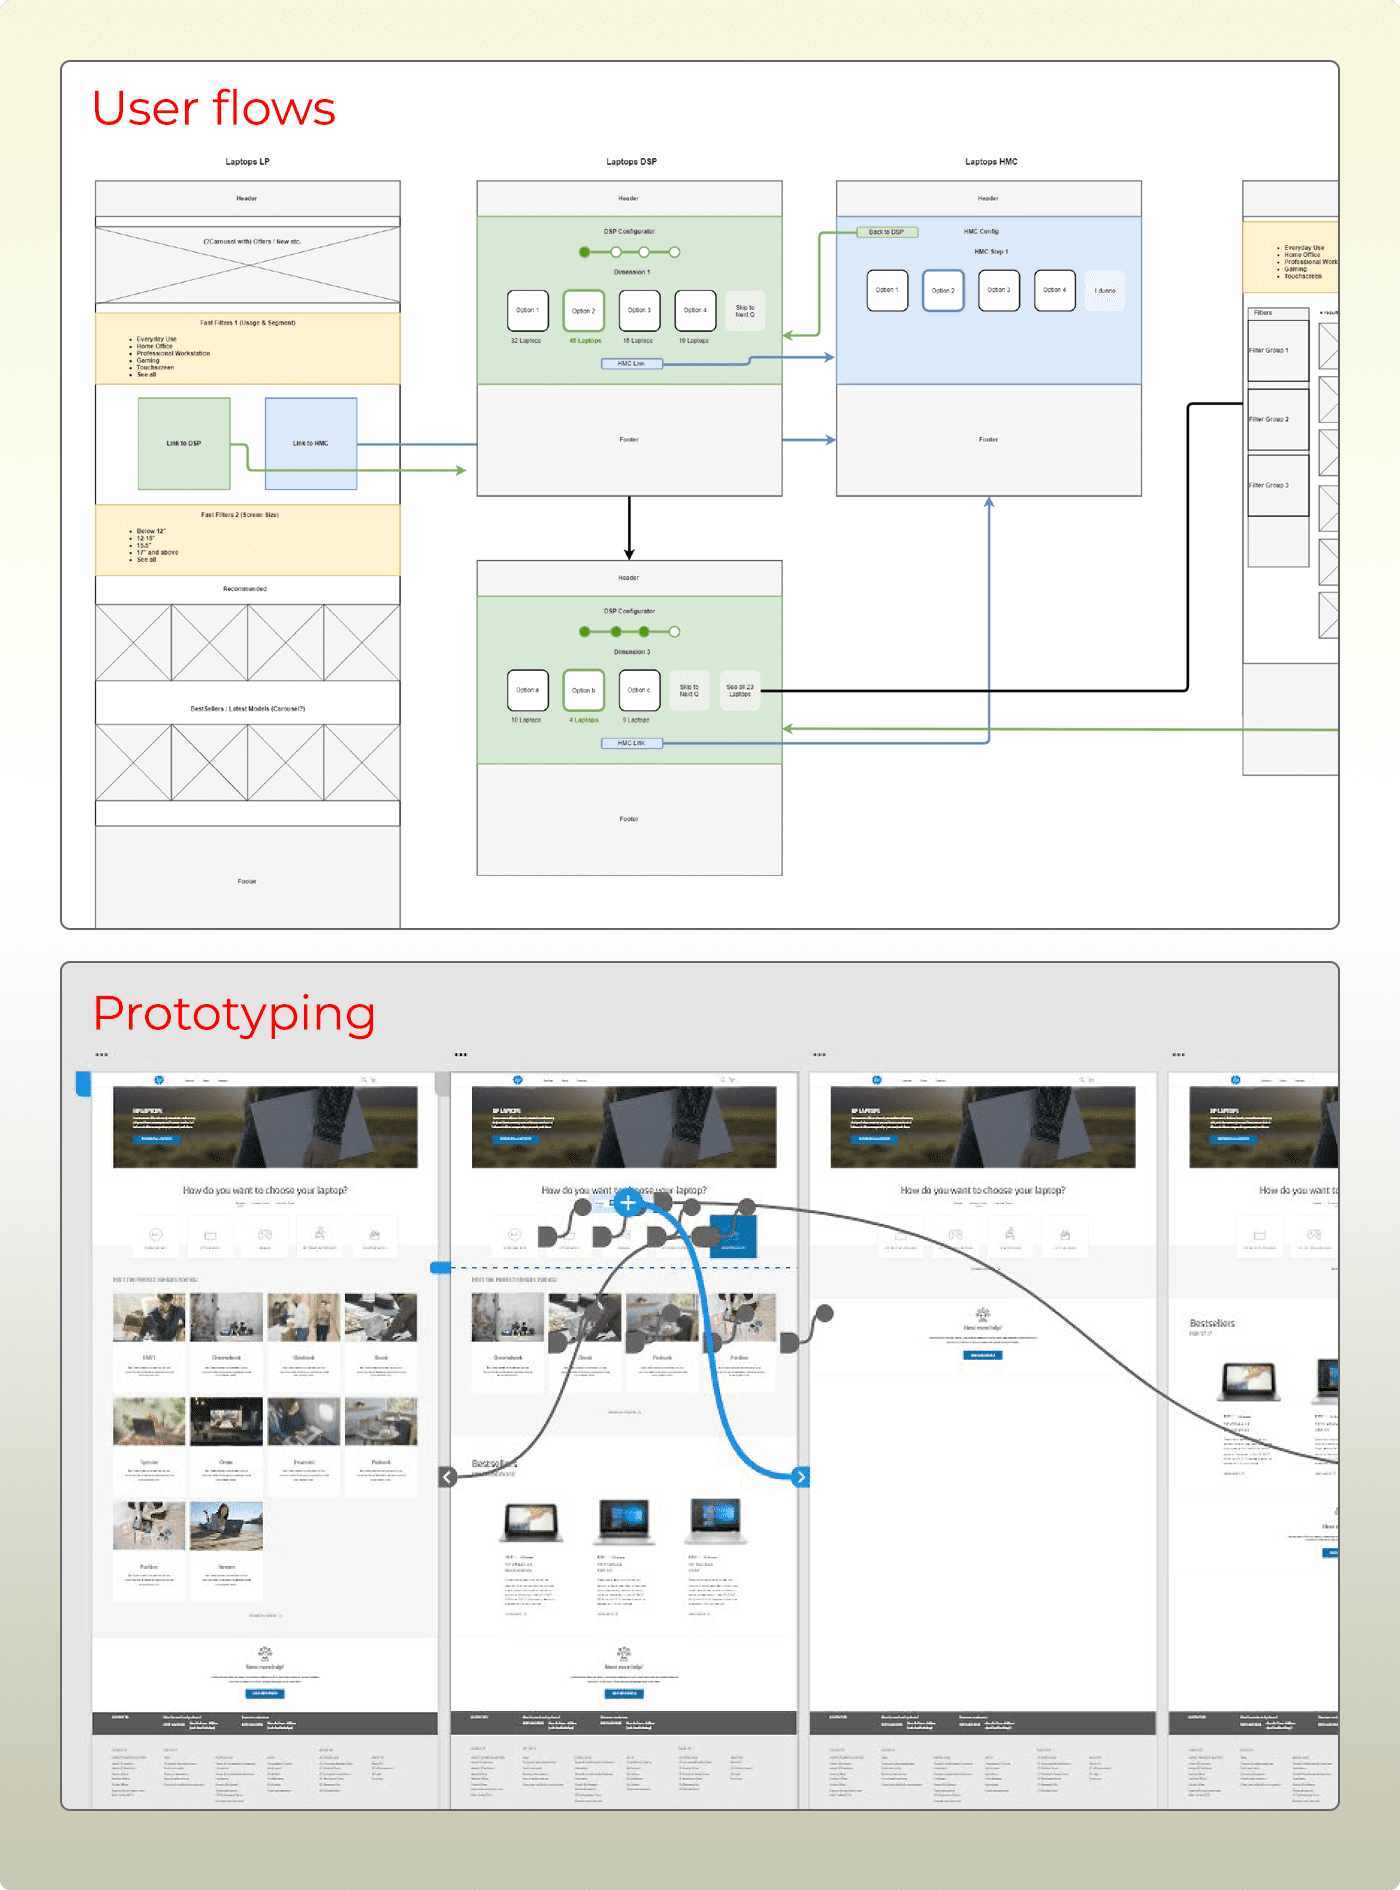 HP Store user flows and prototyping